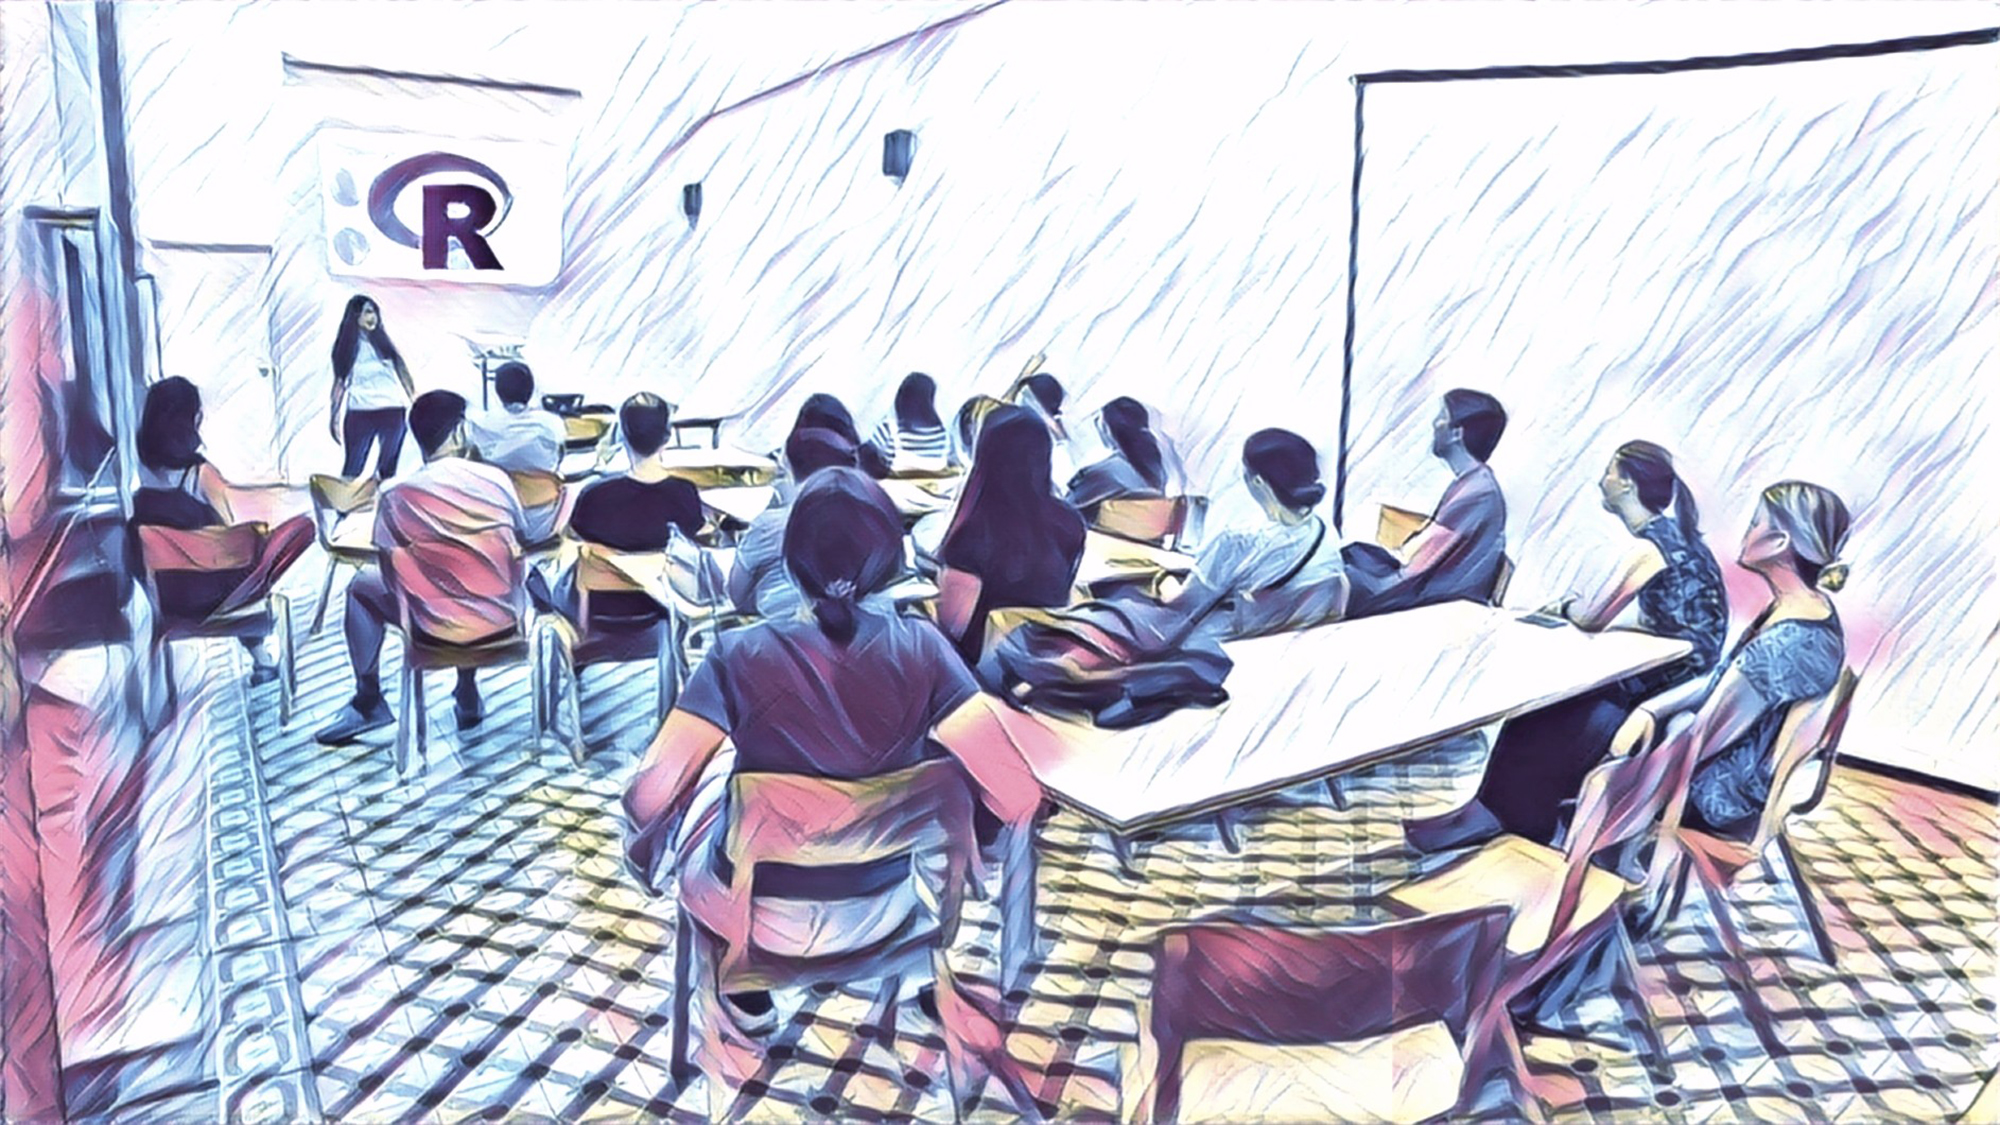 The next Rladies Barcelona meet up (a community of support for women interested in R) will be on October 15 at the PRBB. Image by Mireia Ramos.